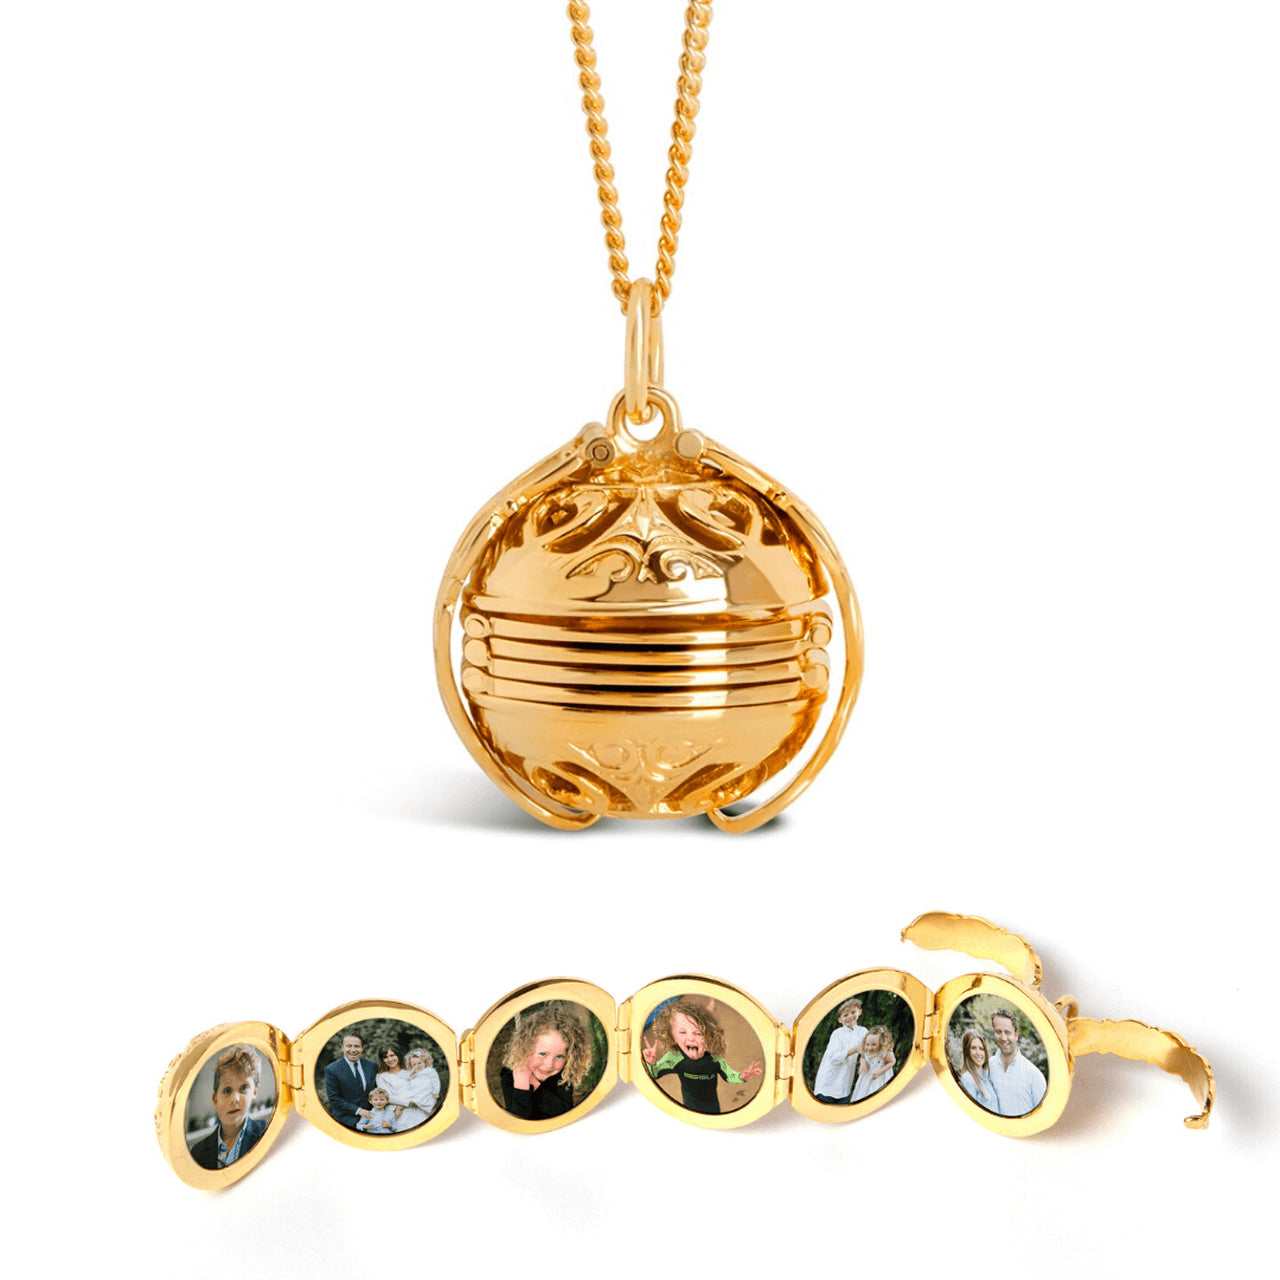 Lily Blanche gold memory keeper family locket necklace with 6 photos, shown open and closed